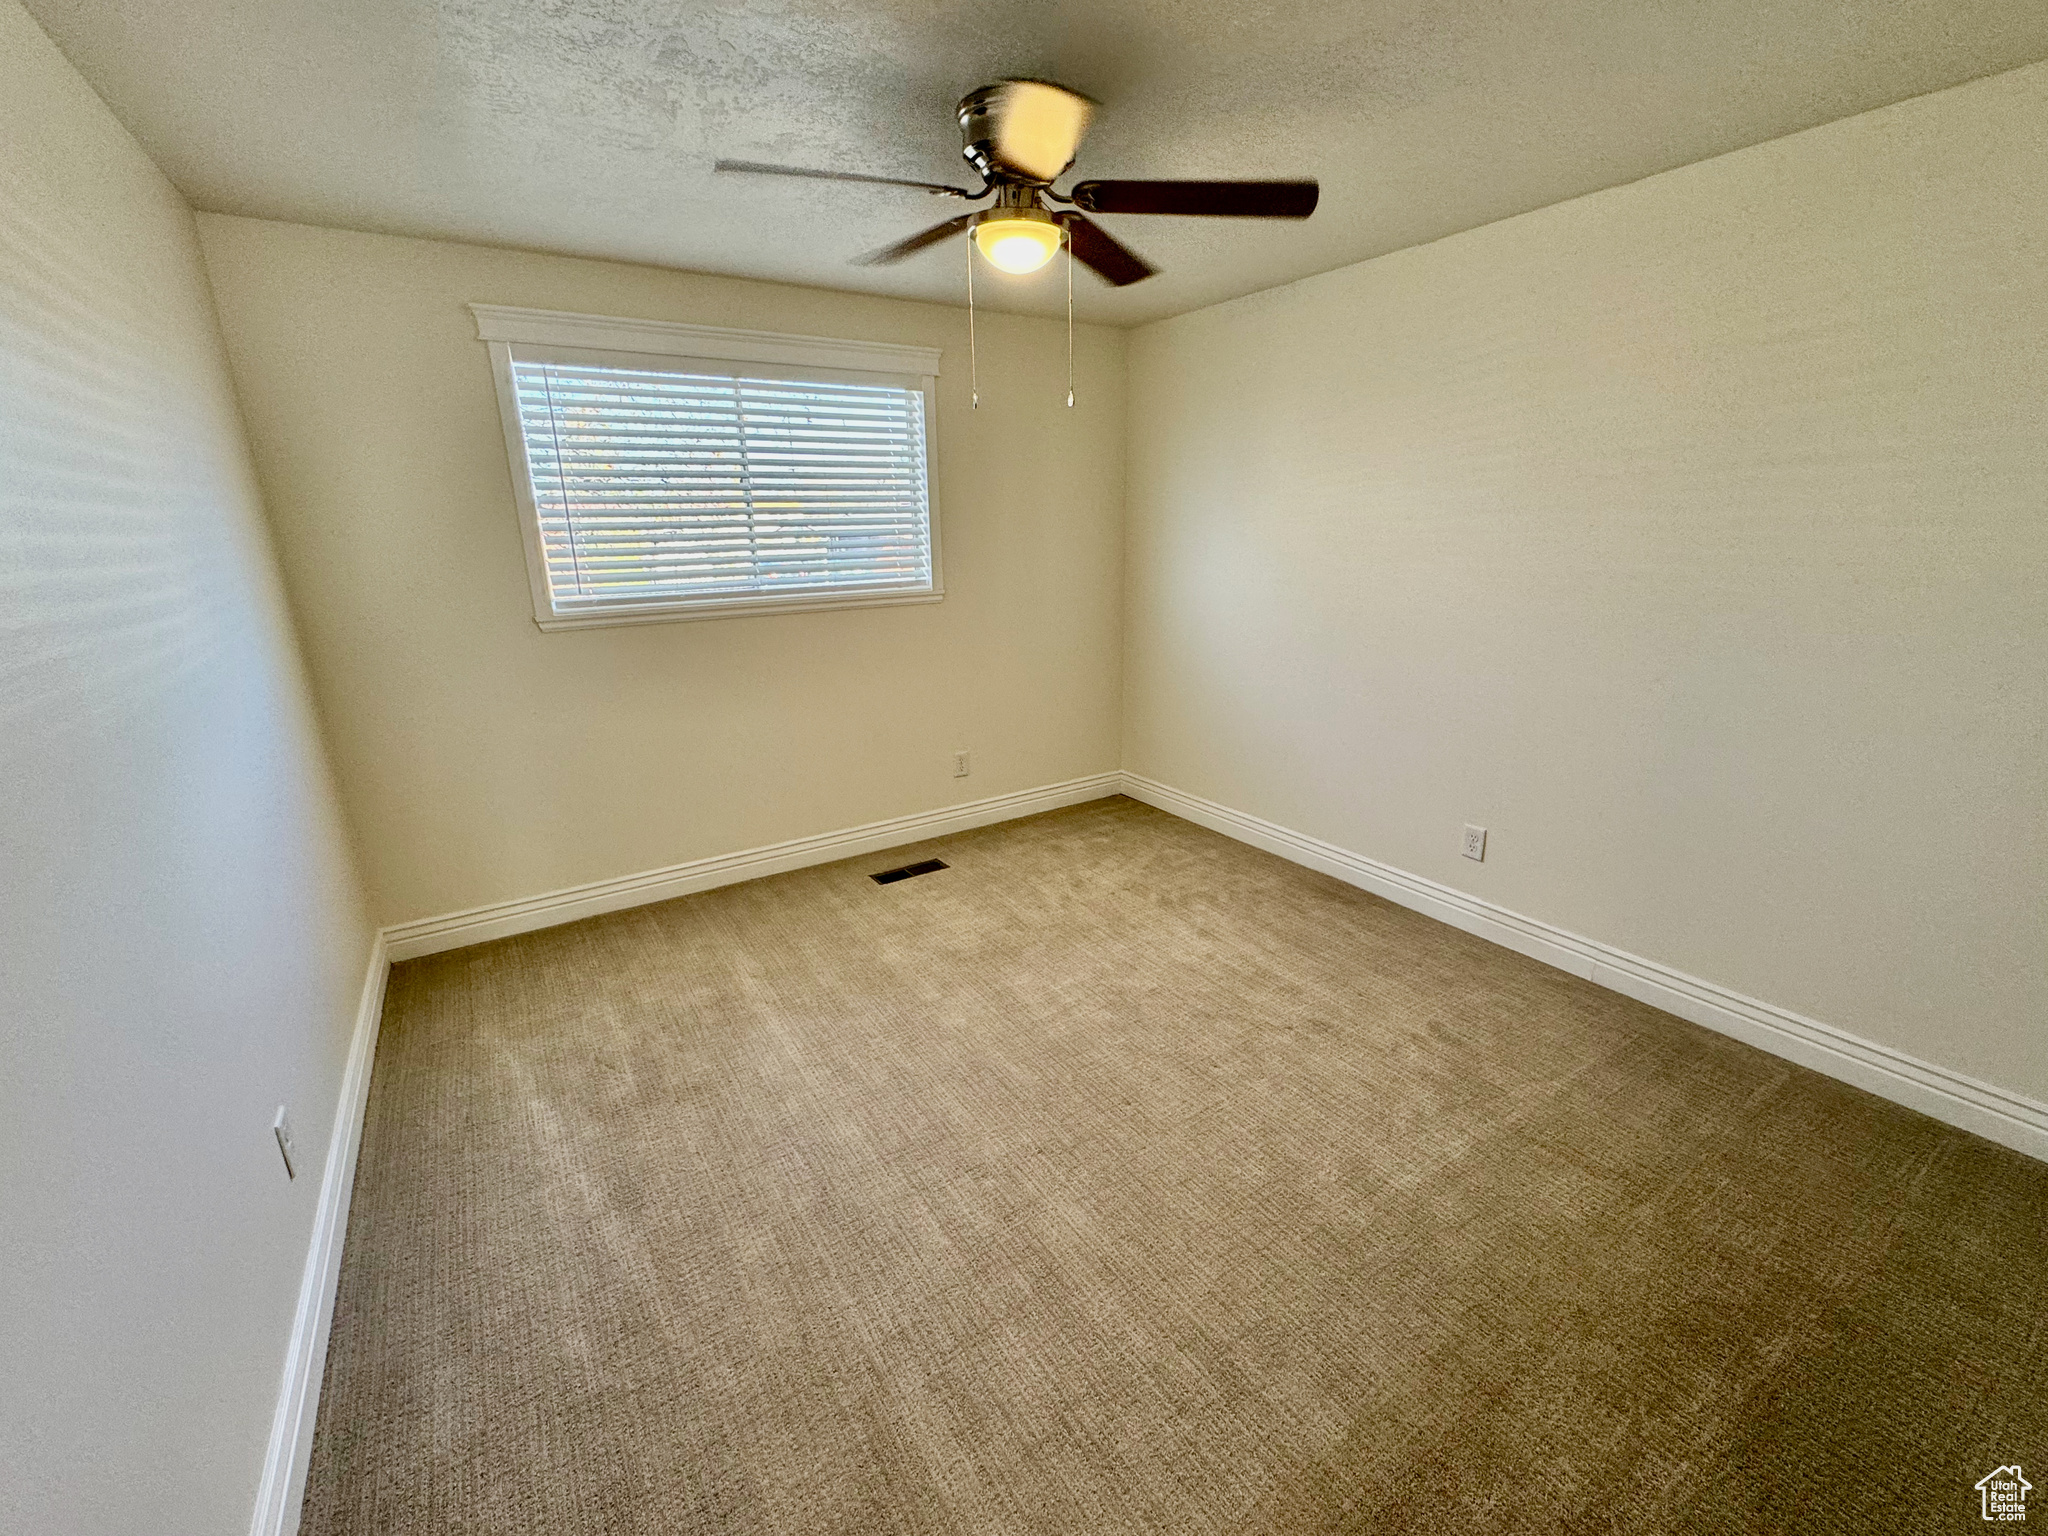 Unfurnished room with light carpet, ceiling fan, and a textured ceiling